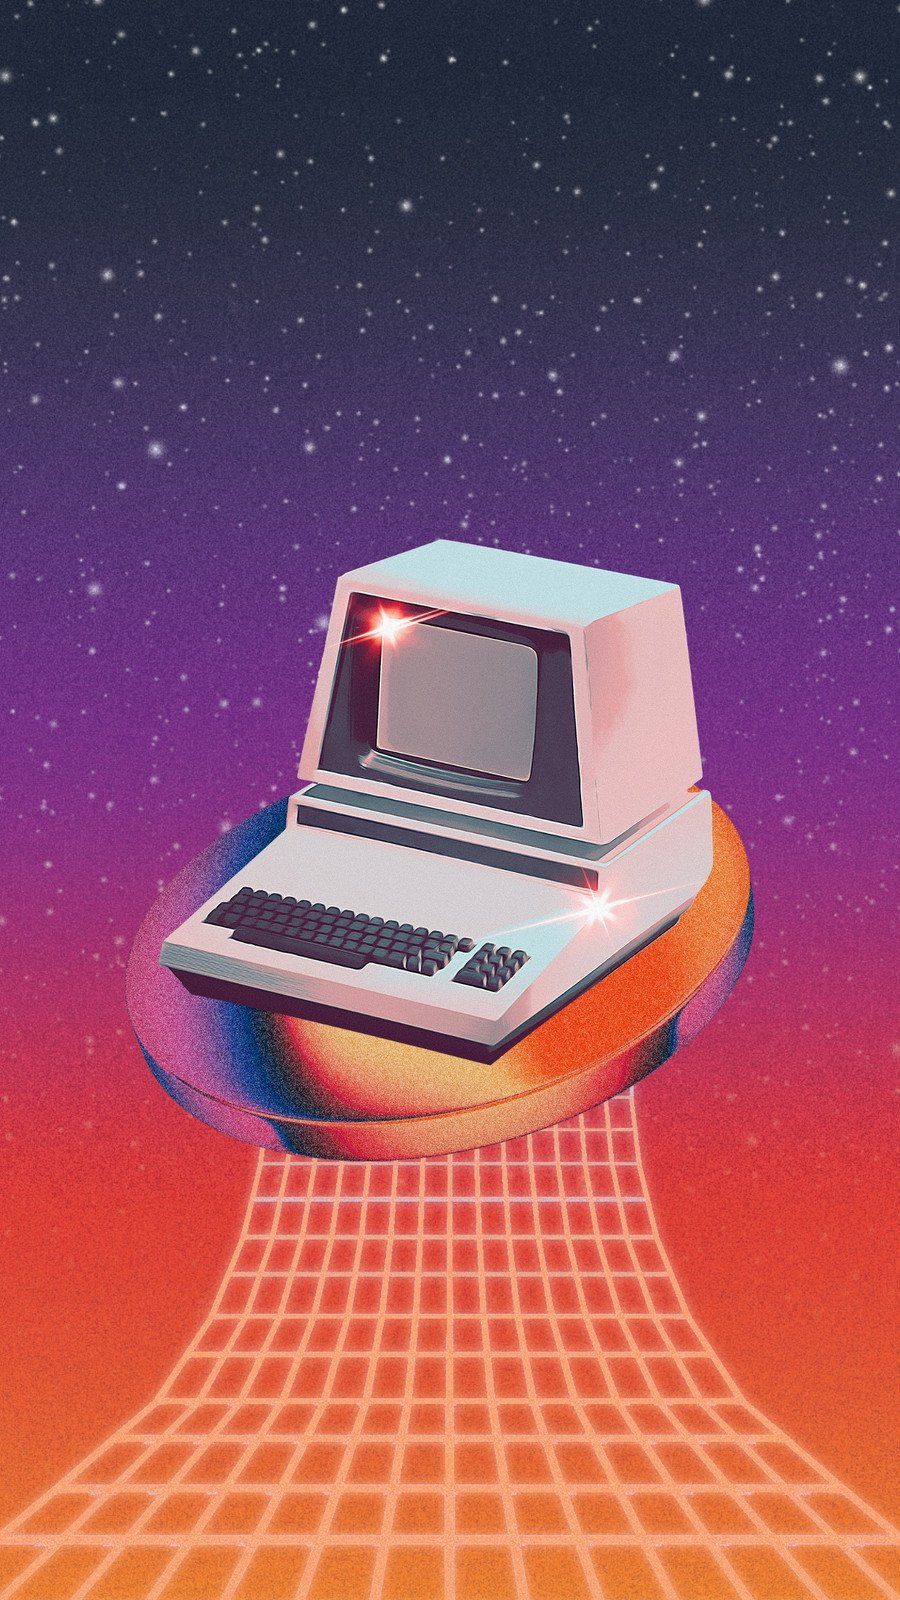 A computer is floating in the air - 80s